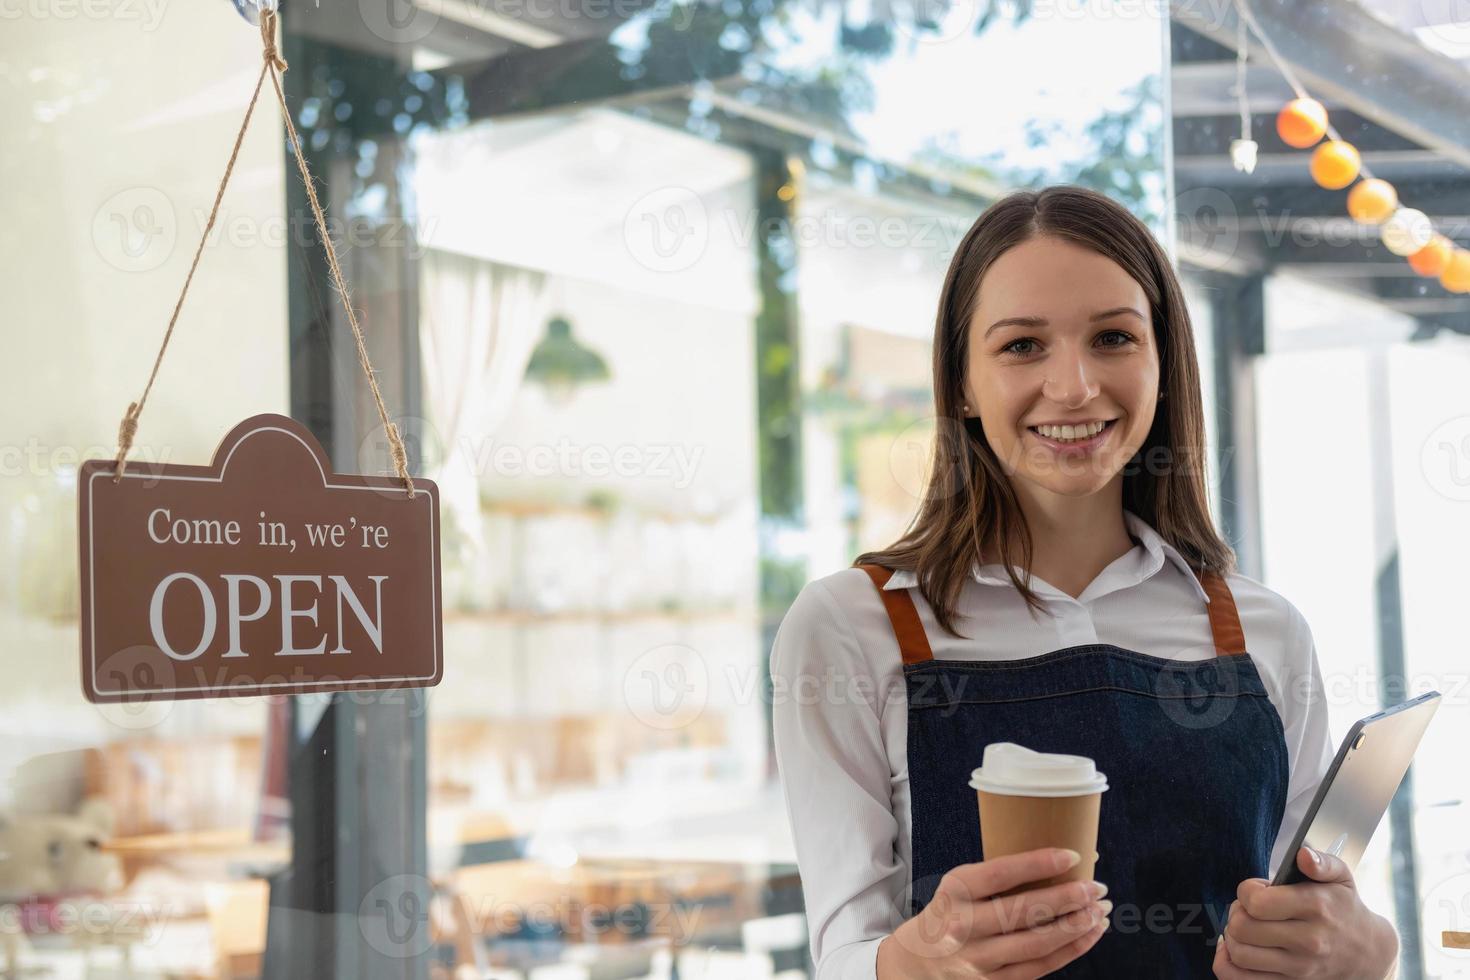 Portrait of a woman, a coffee shop business owner smiling beautifully and opening a coffee shop that is her own business, Small business concept. photo